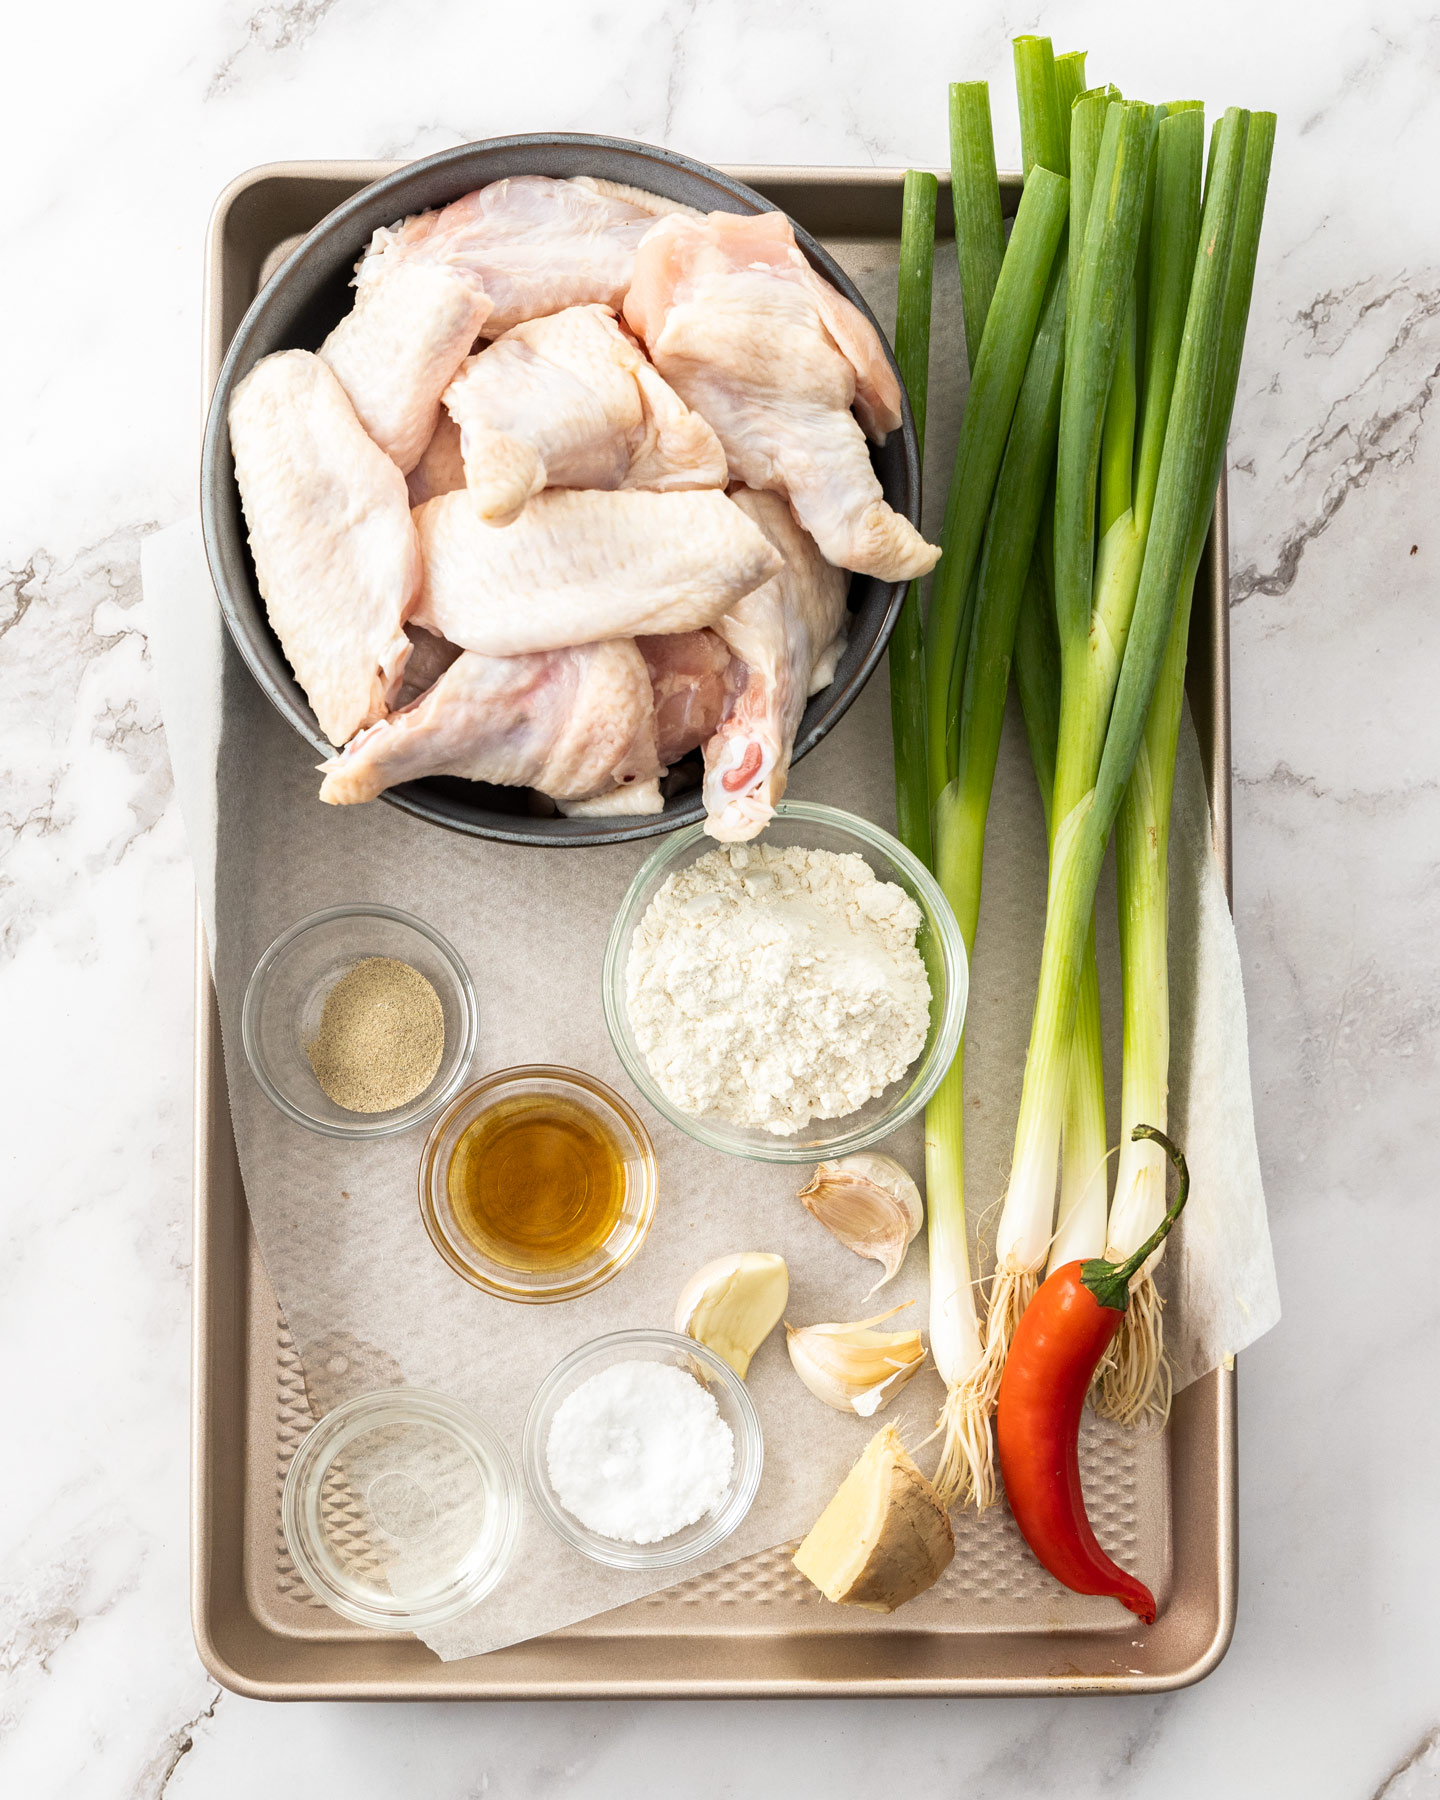 Ingredients for salt and pepper wings on a baking tray.